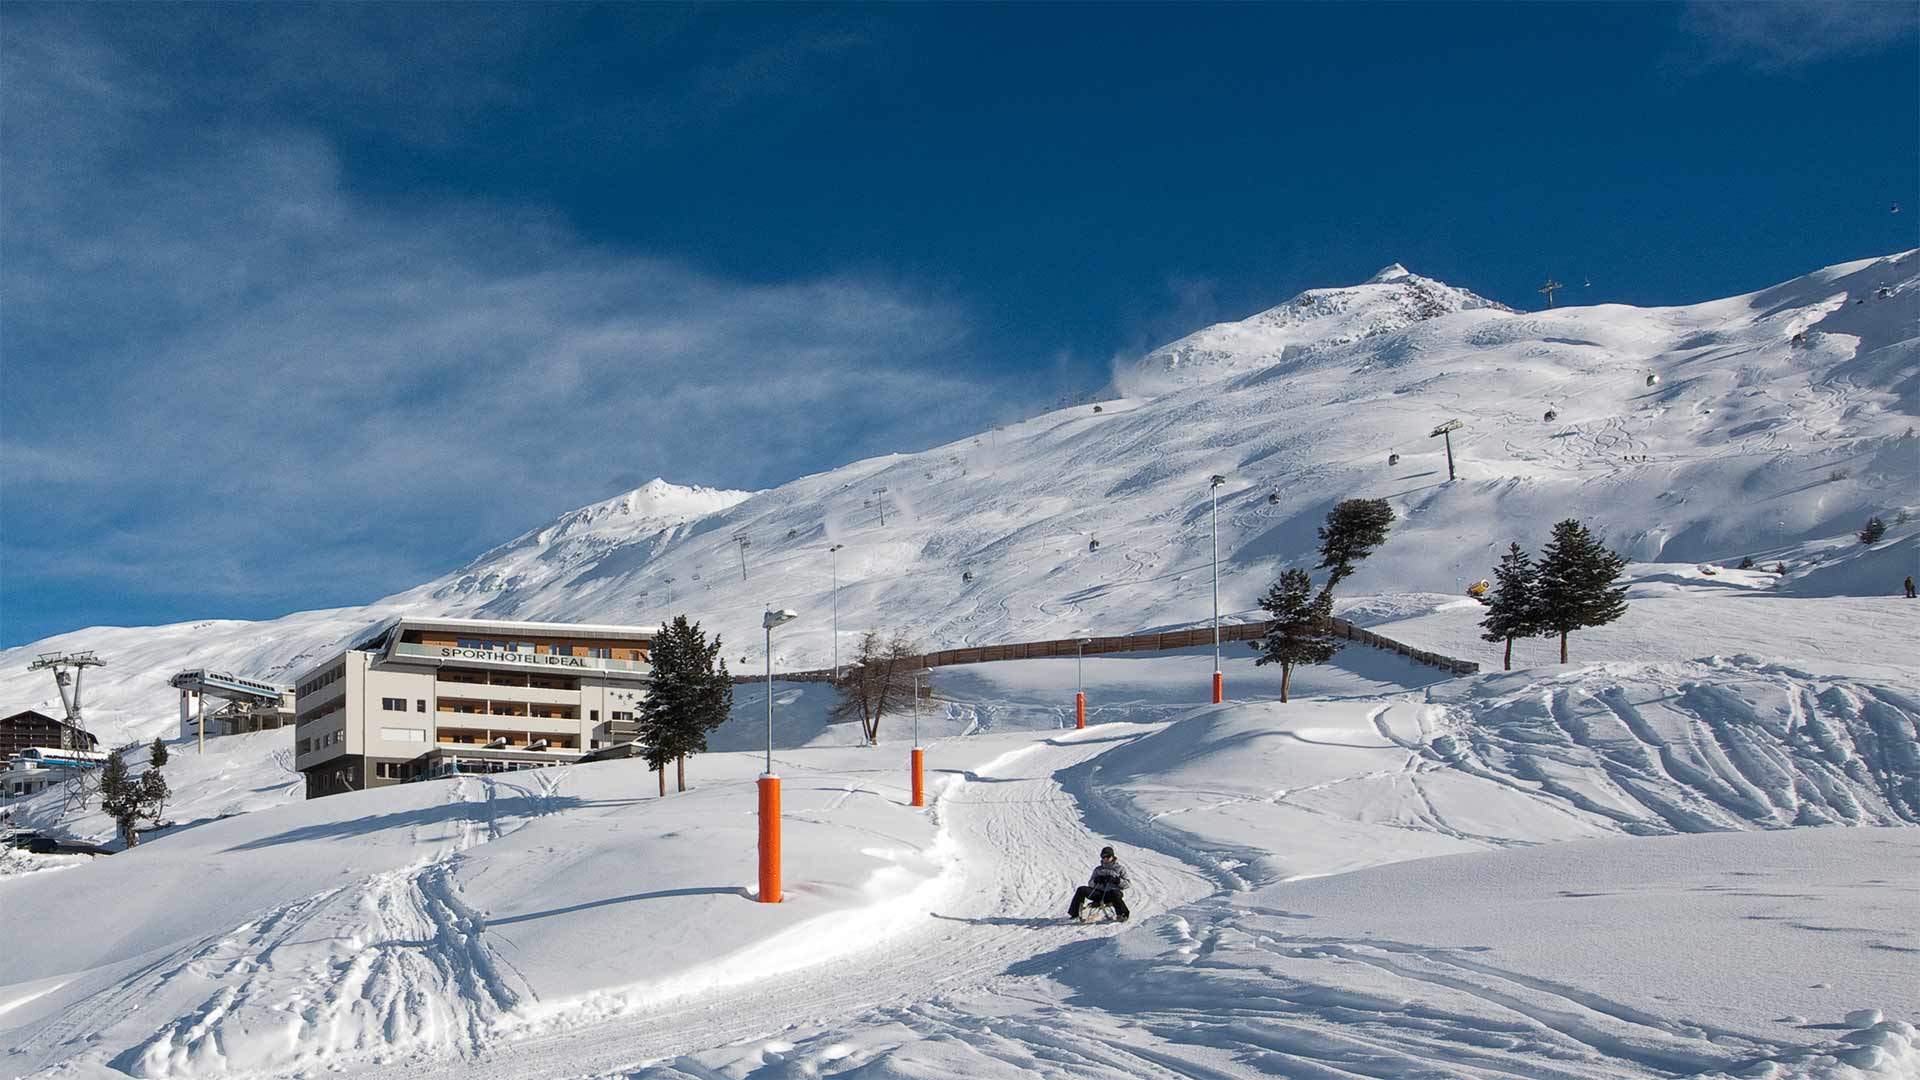 Our ski hotel is placed direcetly next to the slope in Hochgurgl, Tyrol